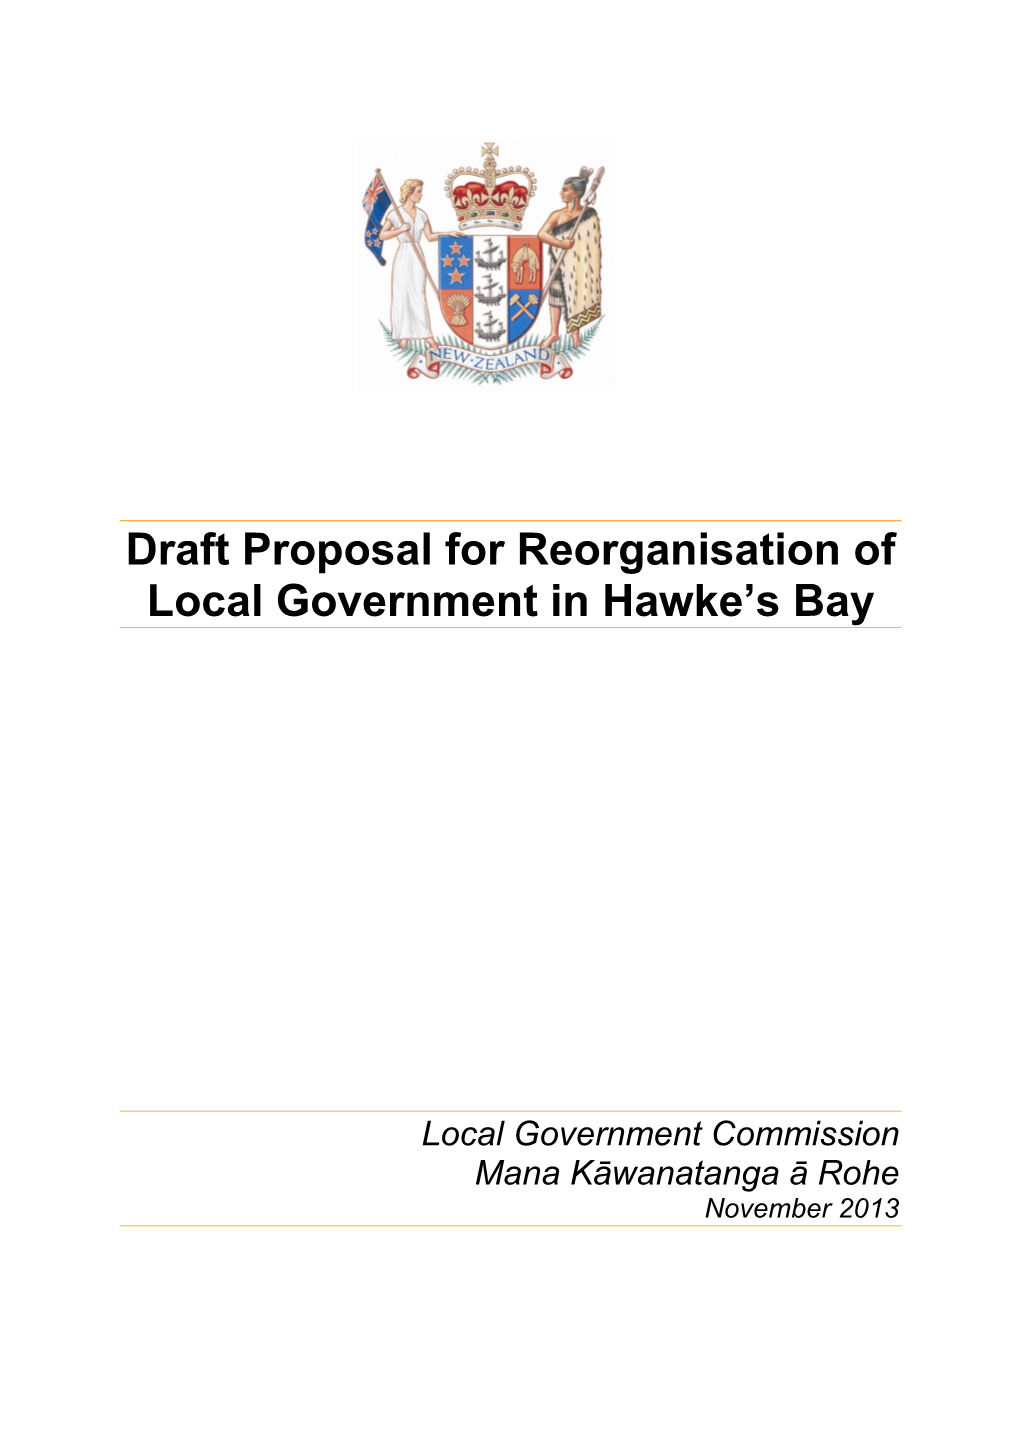 Draft Proposal for Reorganisation of Local Government in Hawke's